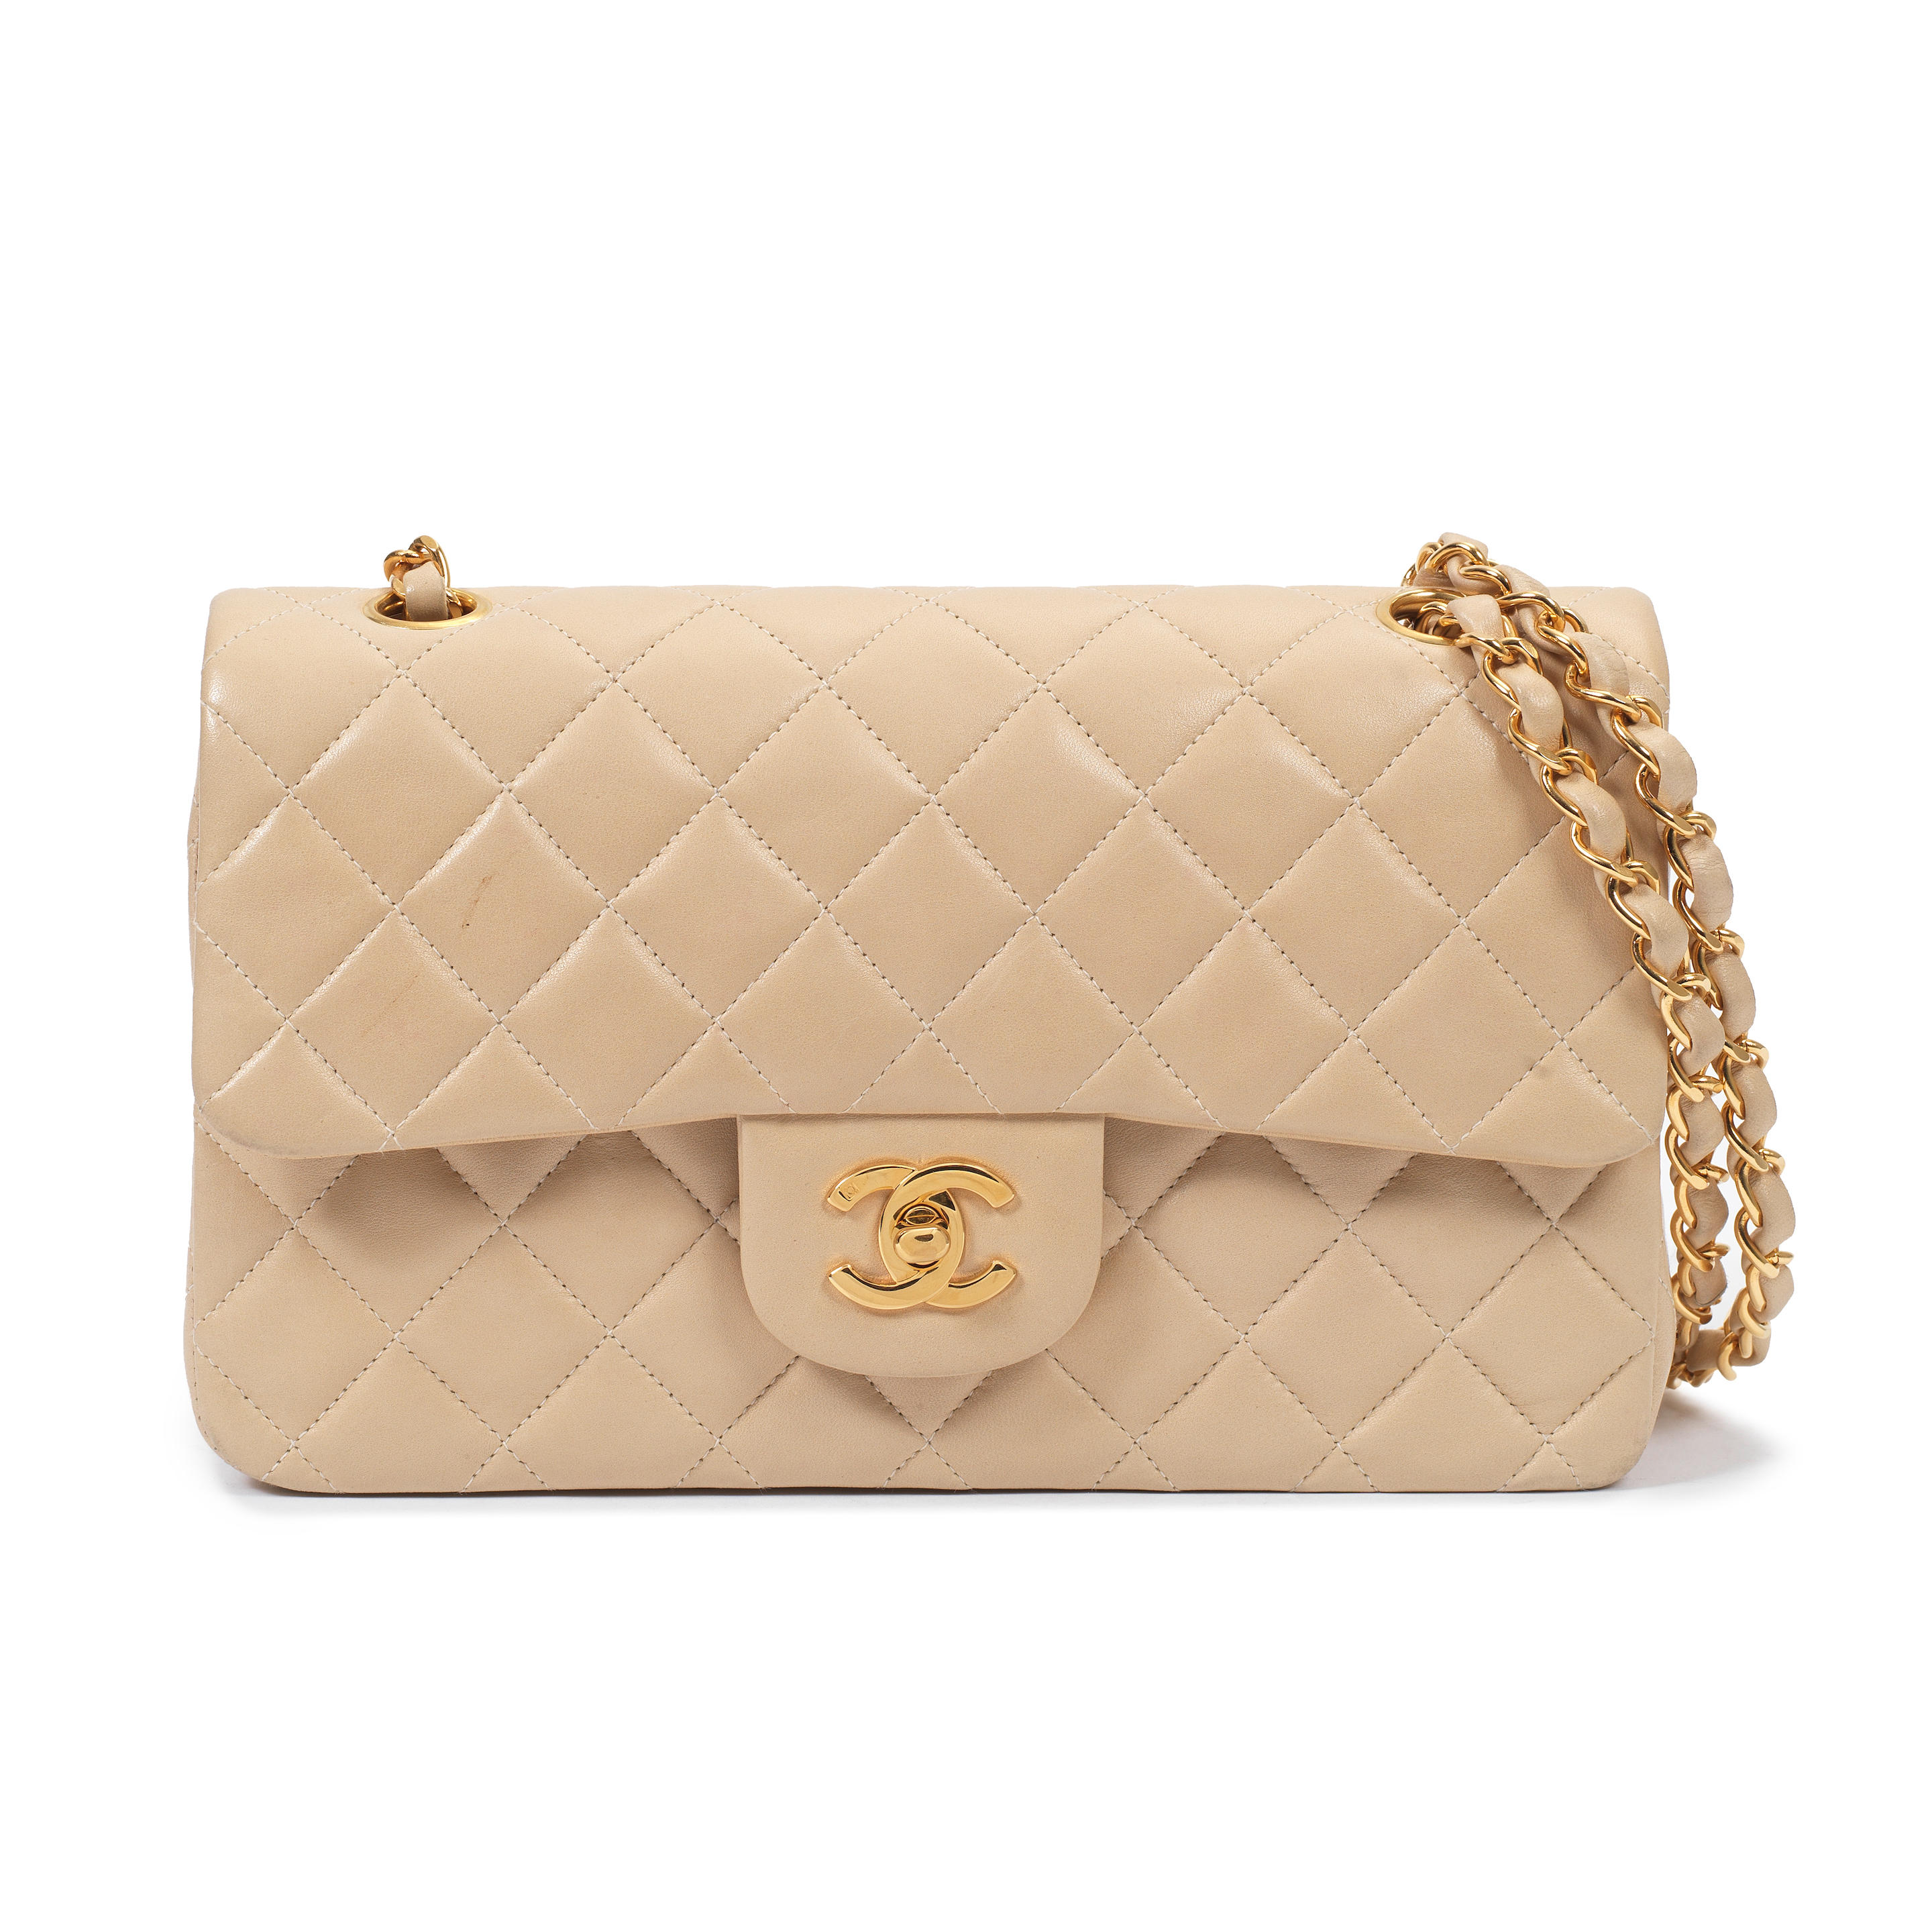 Chanel a Beige Lambskin Small Classic Double Flap Bag c.1996 (includes  serial sticker and authenticity card) - Bonhams